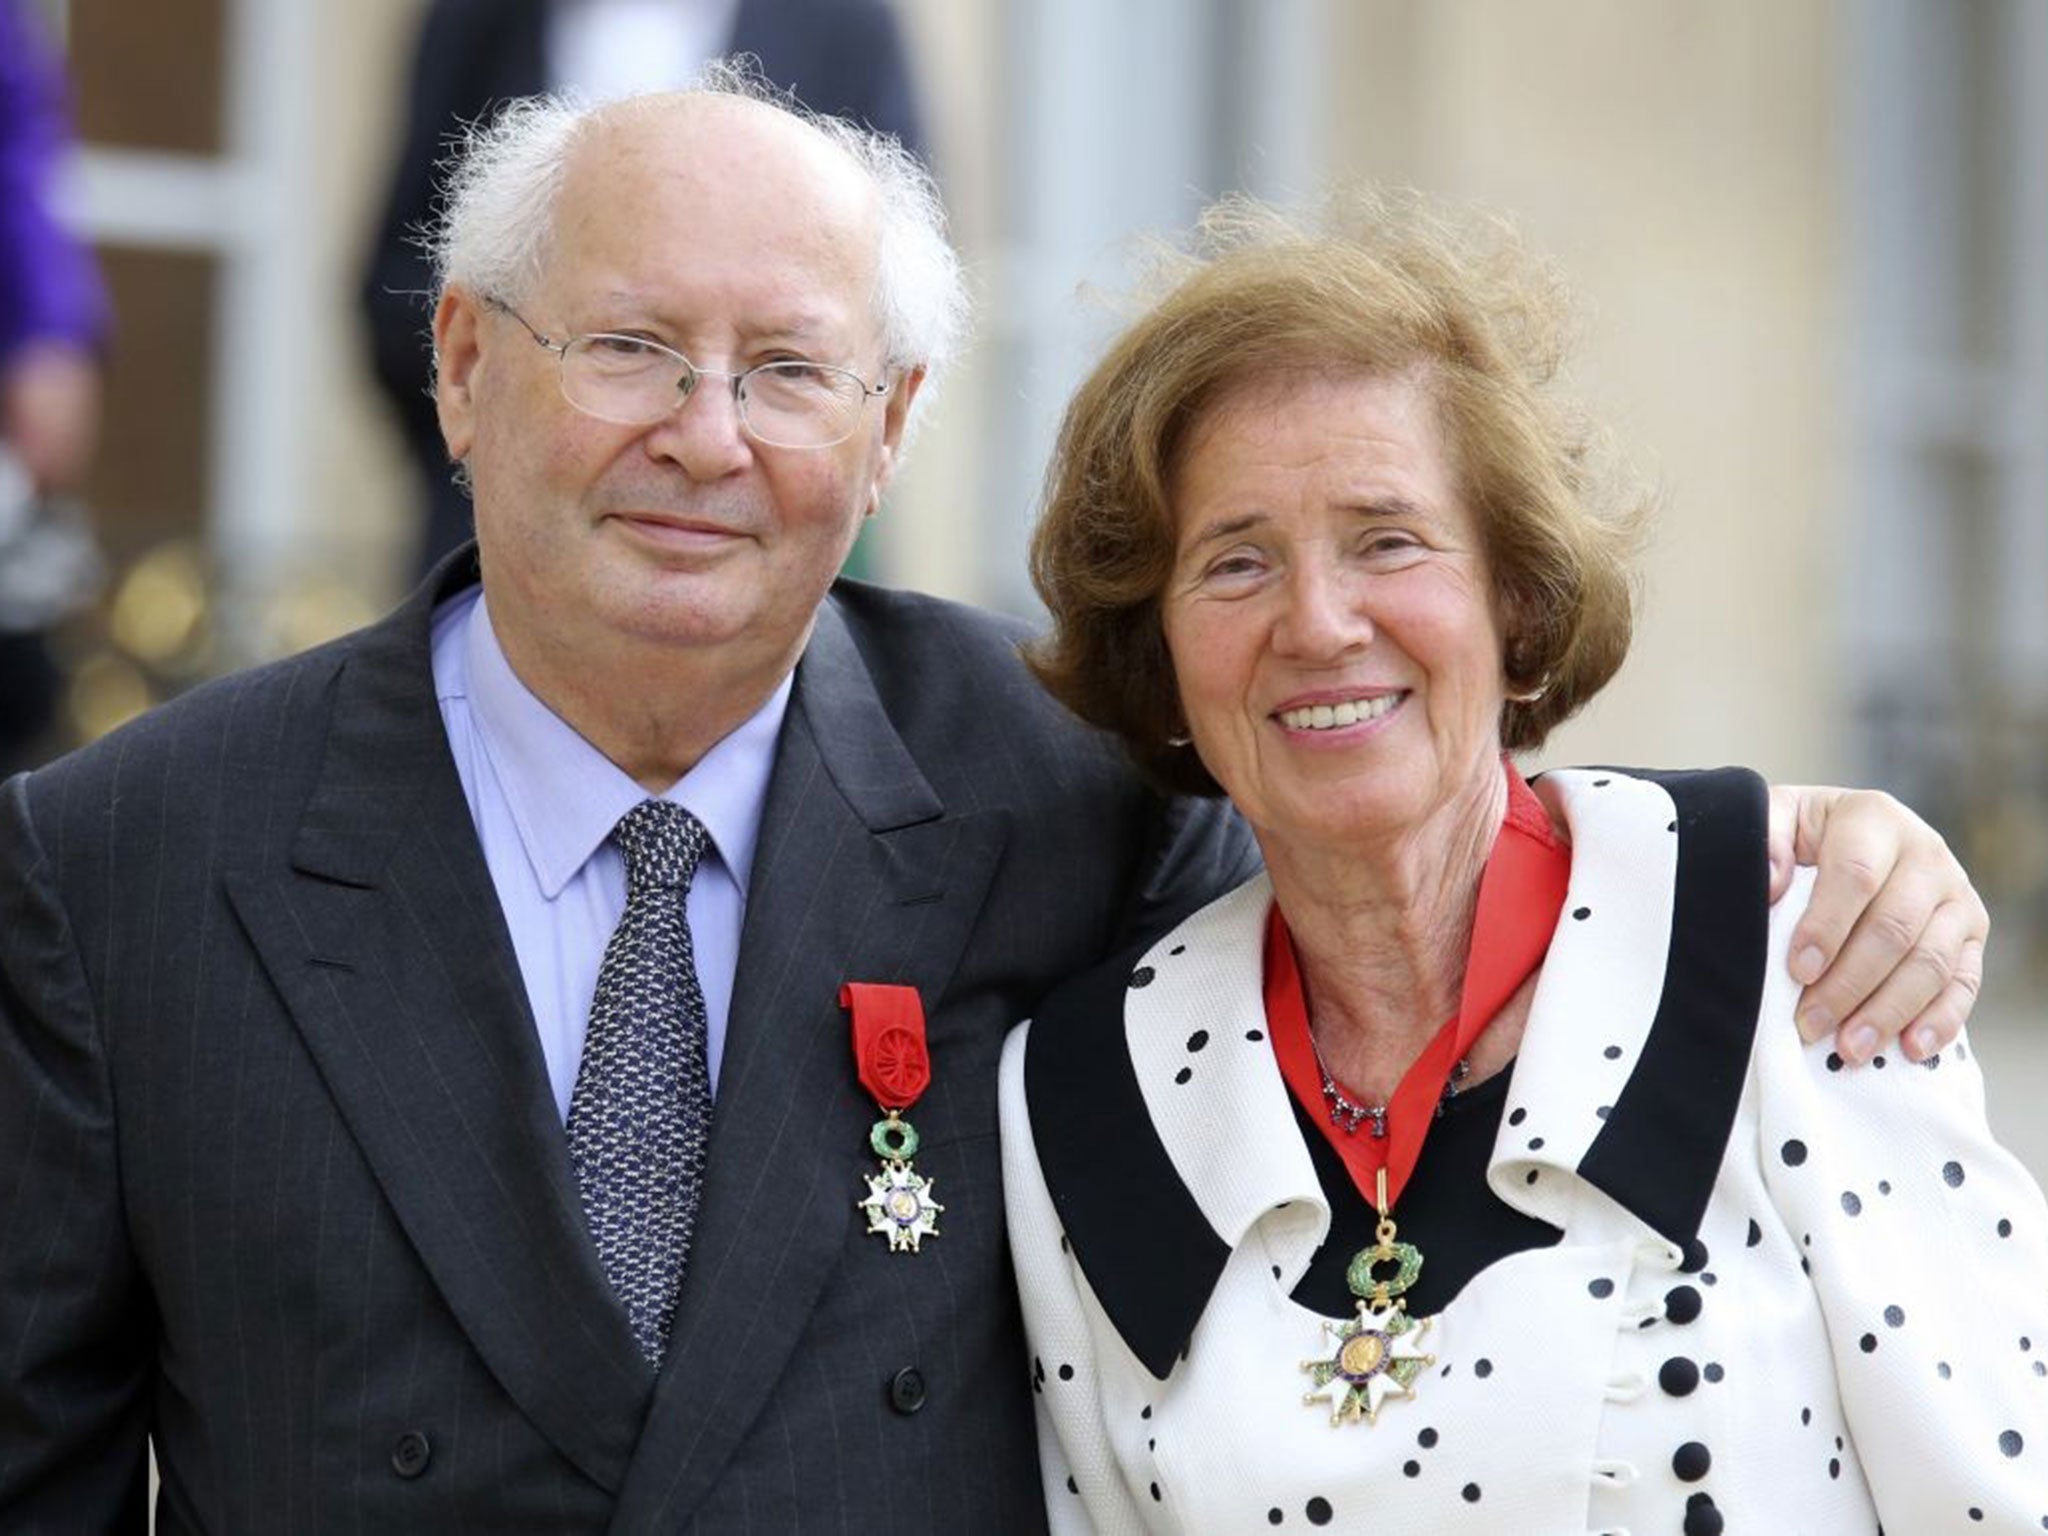 French famed Nazi hunter Serge Klarsfeld poses with his wife Beate, as they leave the Elysee Palace in Paris, after being awarded with the Legion of Honor medal by French President Francois Hollande.